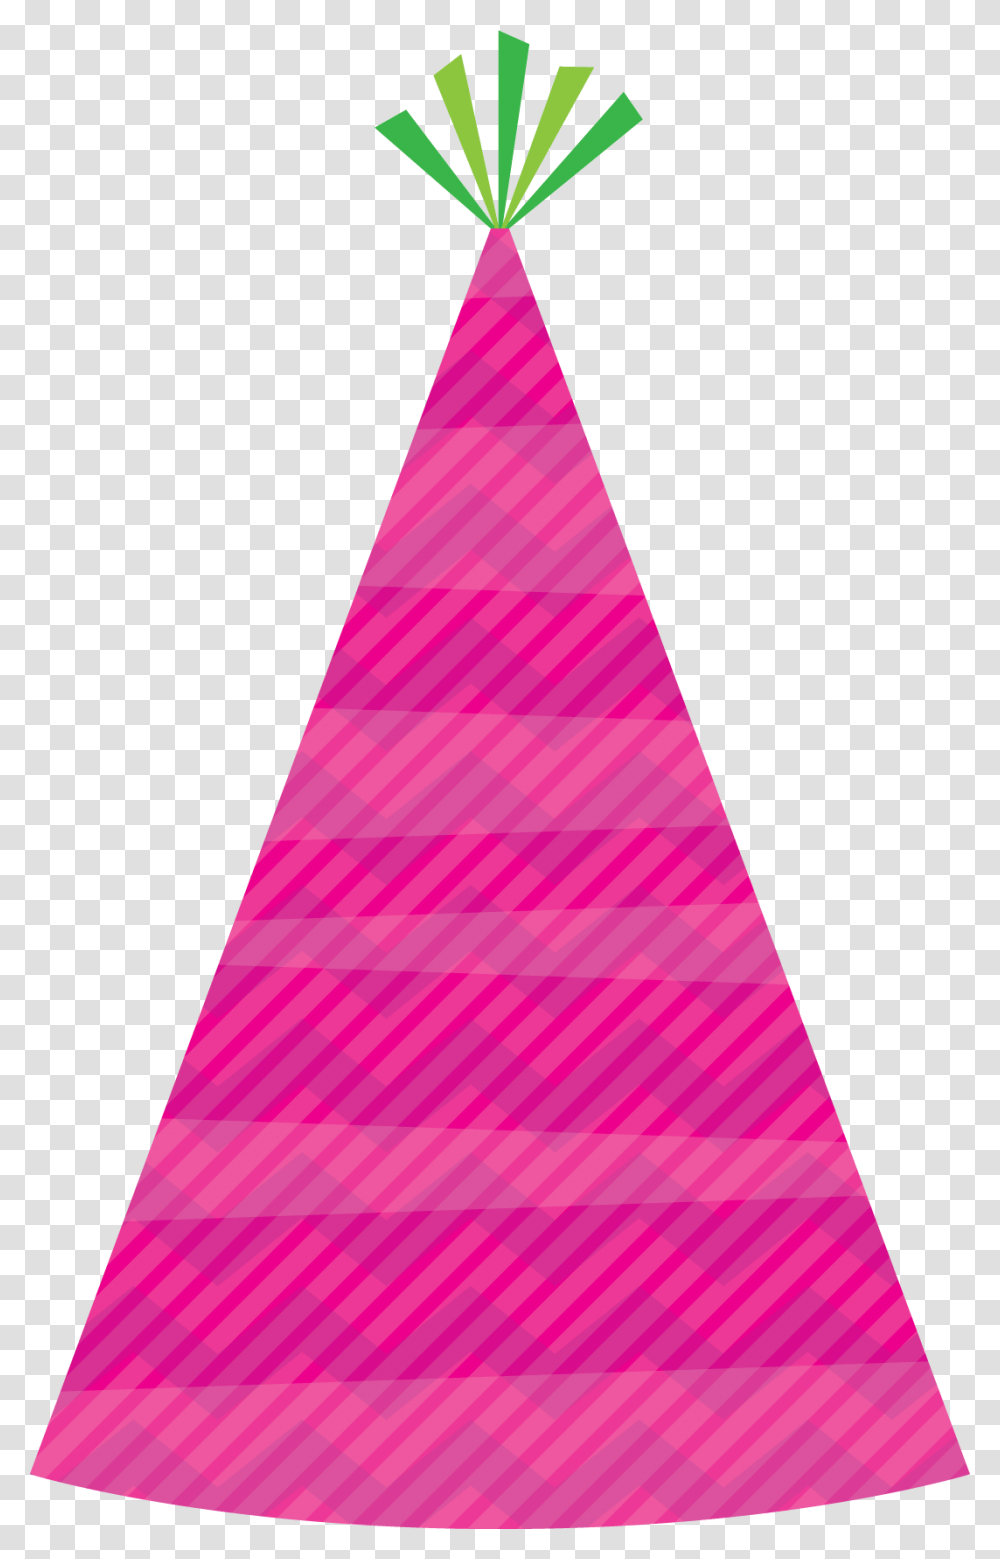 Birthday Hat Clipart Image Birth Day Hat, Triangle, Cone Transparent Png